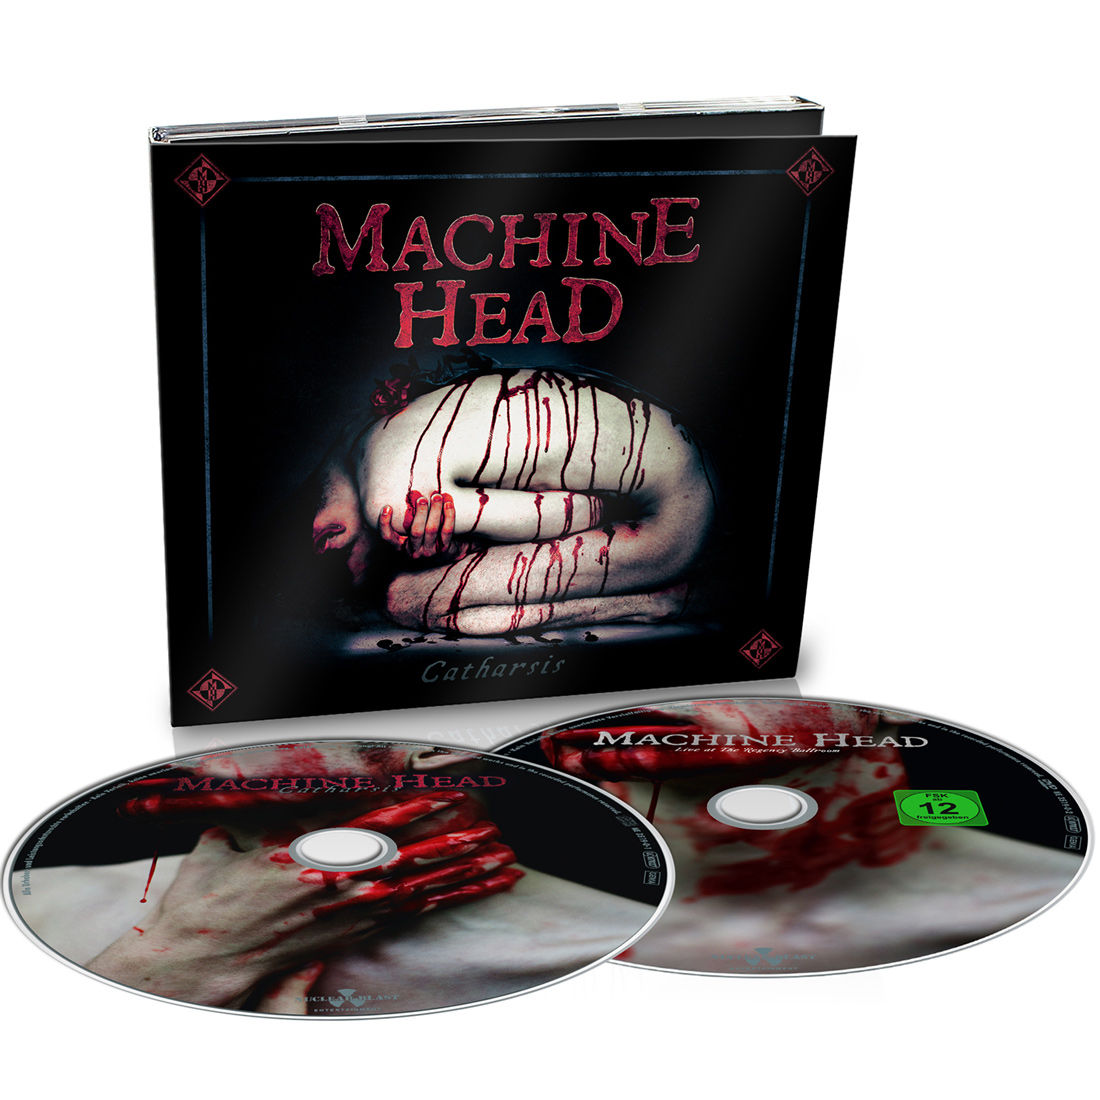 Machine Head - Catharsis: Limited Edition CD + DVD